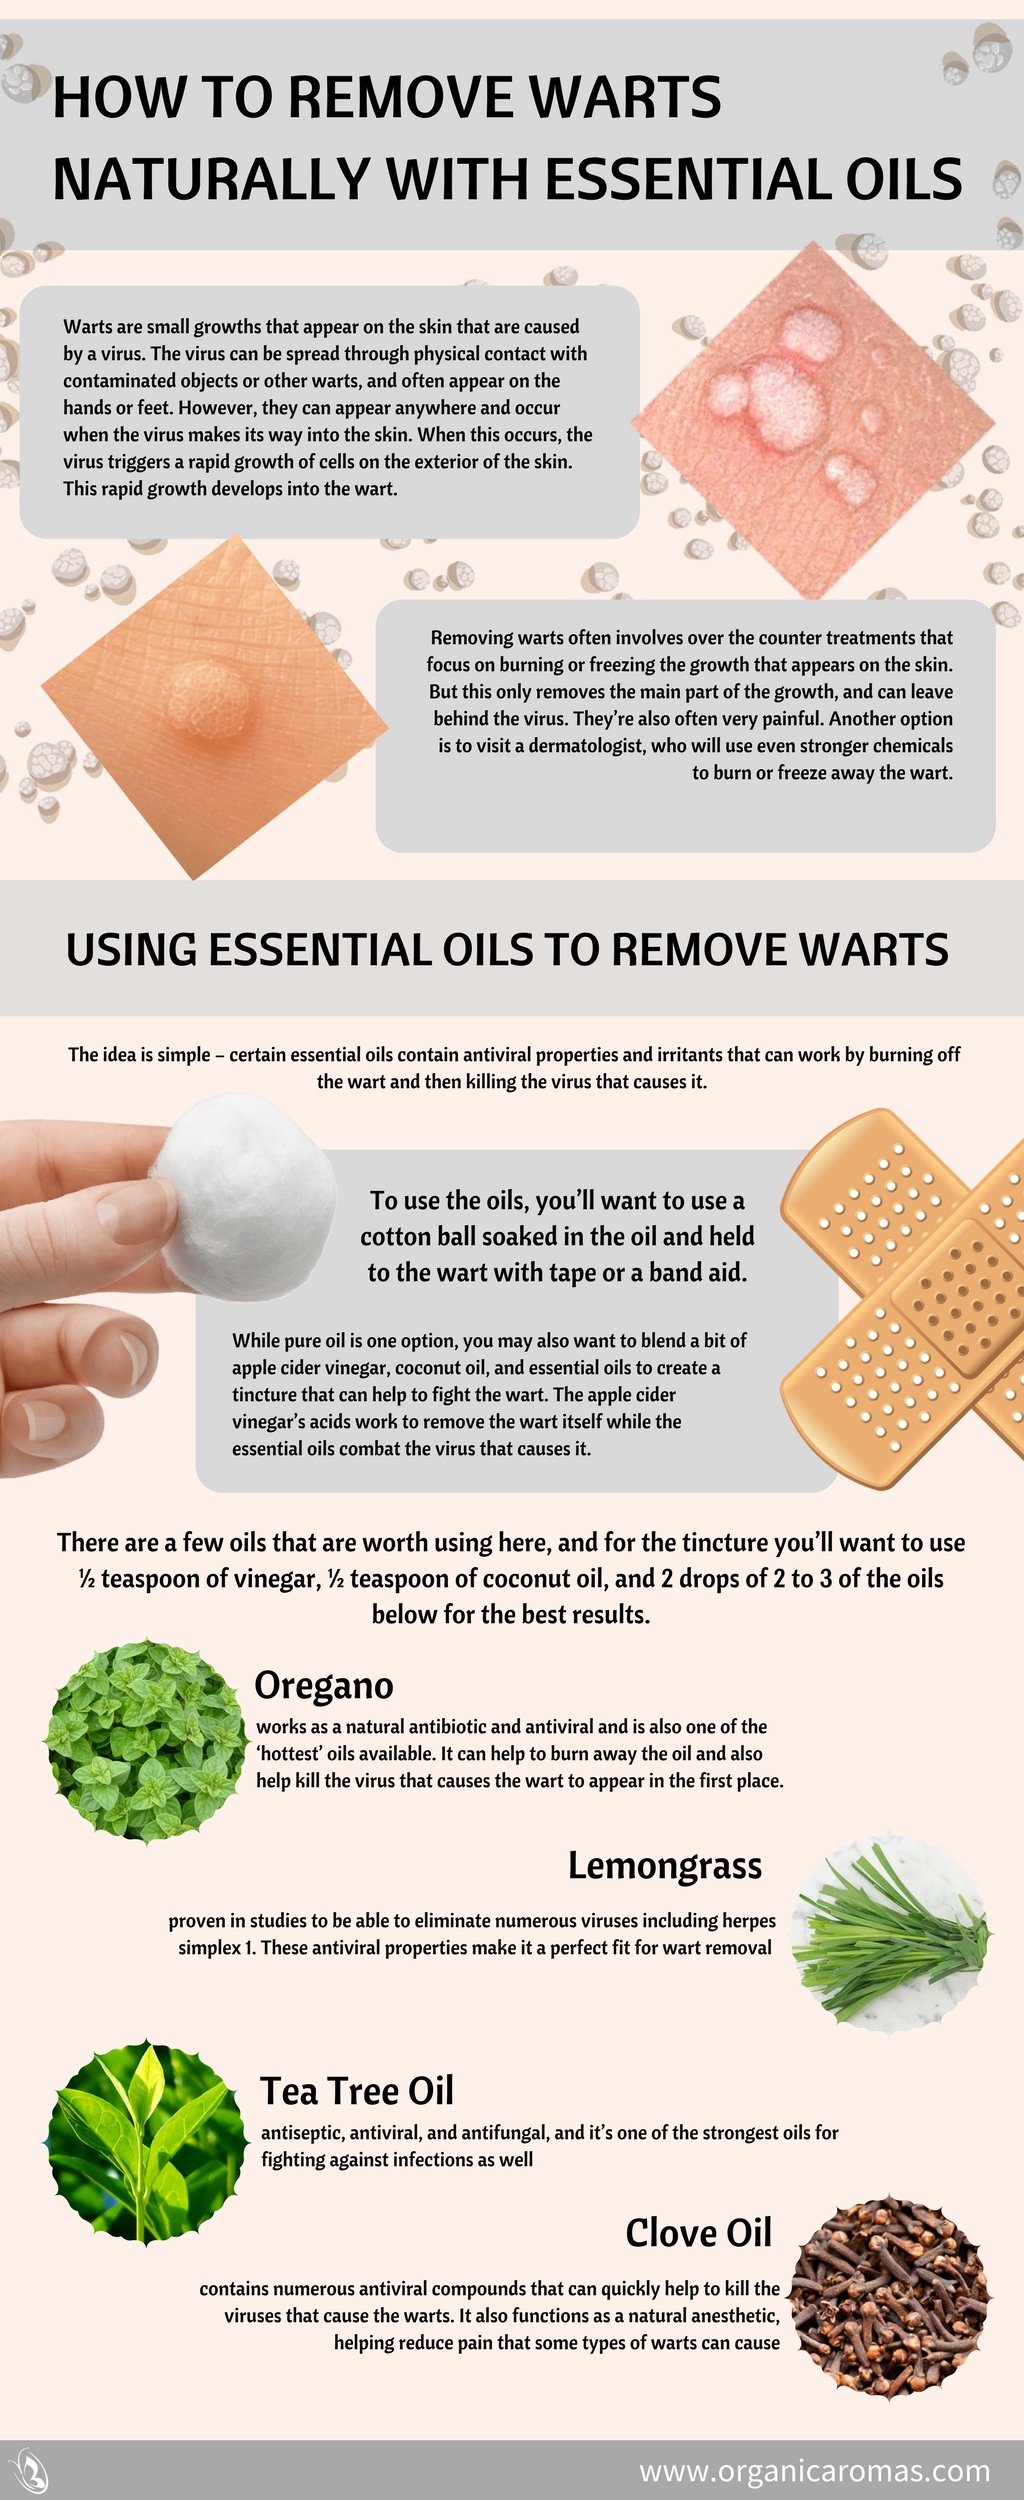 How to Remove Warts Naturally With Essential Oils - Tweetoflove